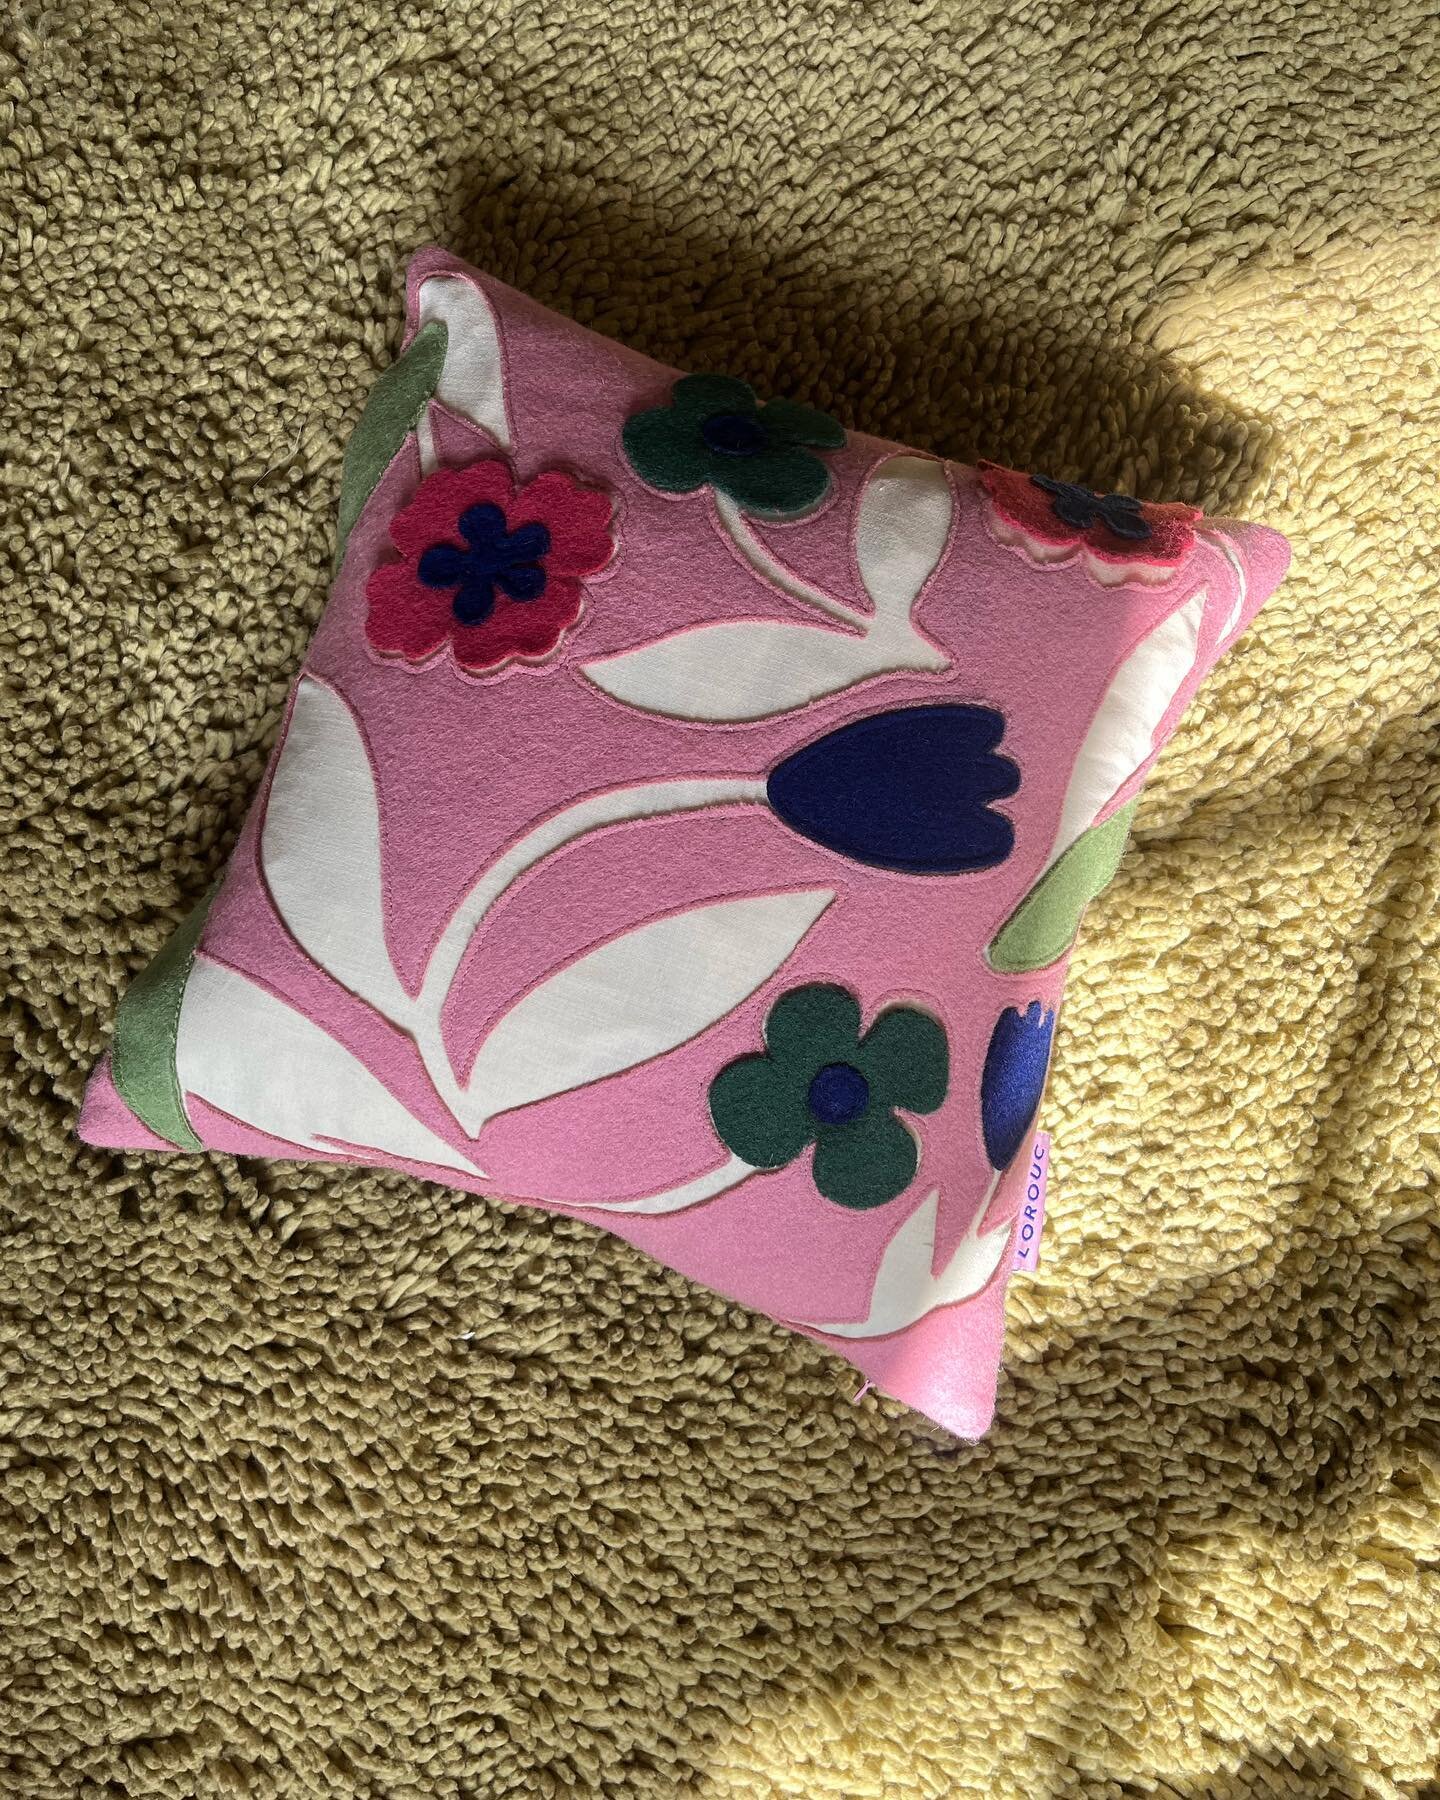 Snapped in the 2 seconds of spring sun we had yesterday 
.
.
.
.
.
.
.
.
.
.
.
#interiorstyling #colourfulhome #colourfulinteriors #colourlovers #cushion #handmade #homedecor #homedecoration #homeware #interiordecor #interiordecoration #interioreccen